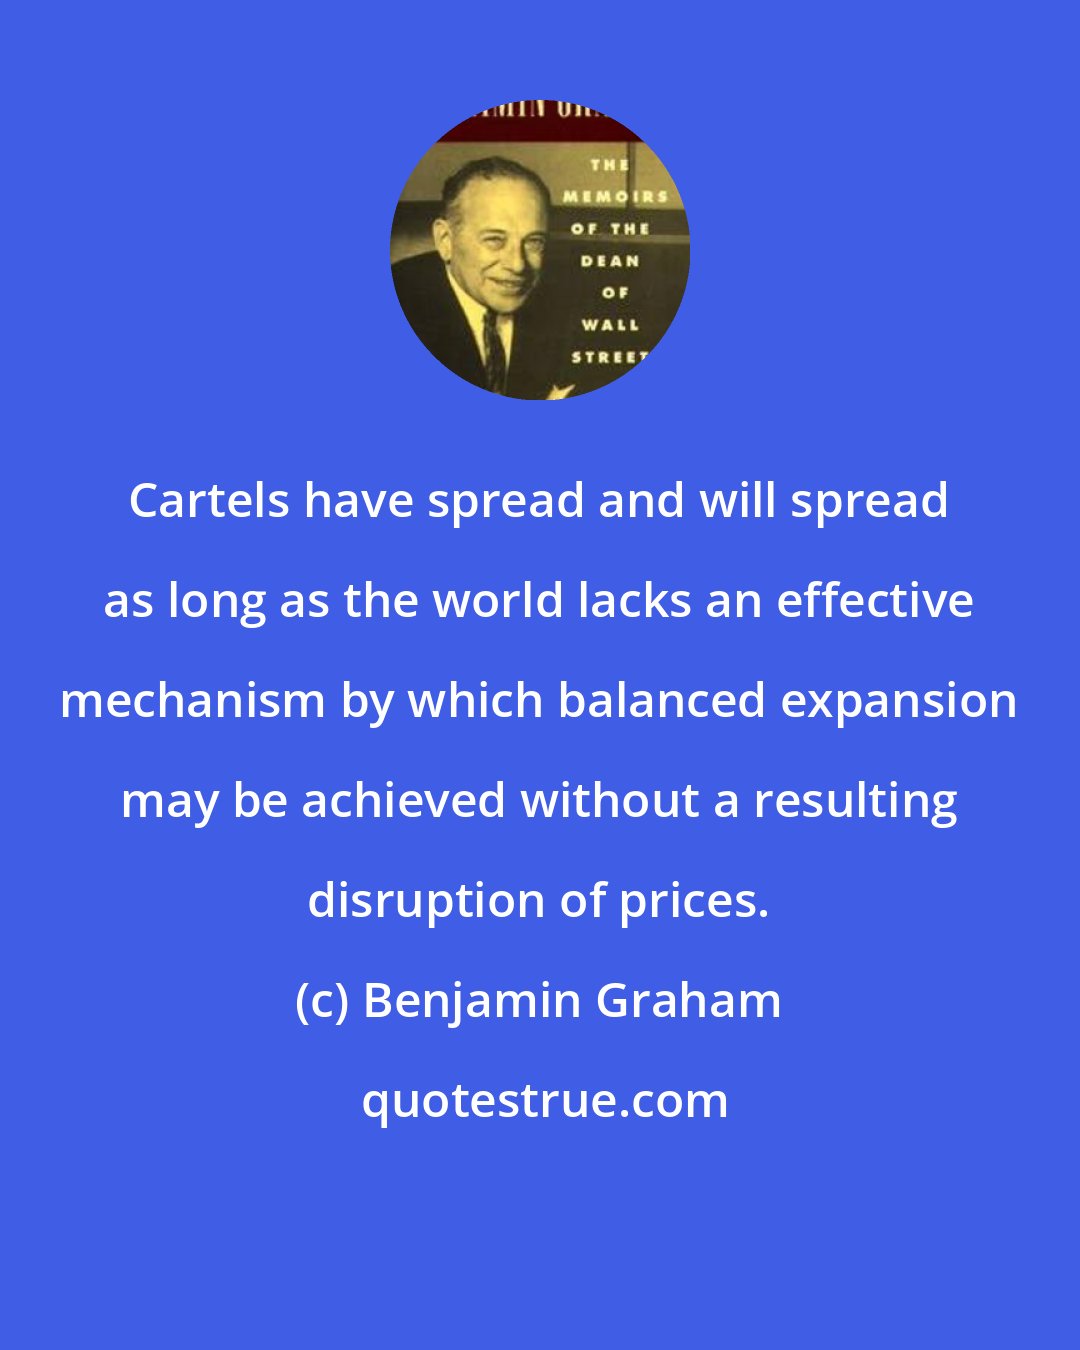 Benjamin Graham: Cartels have spread and will spread as long as the world lacks an effective mechanism by which balanced expansion may be achieved without a resulting disruption of prices.